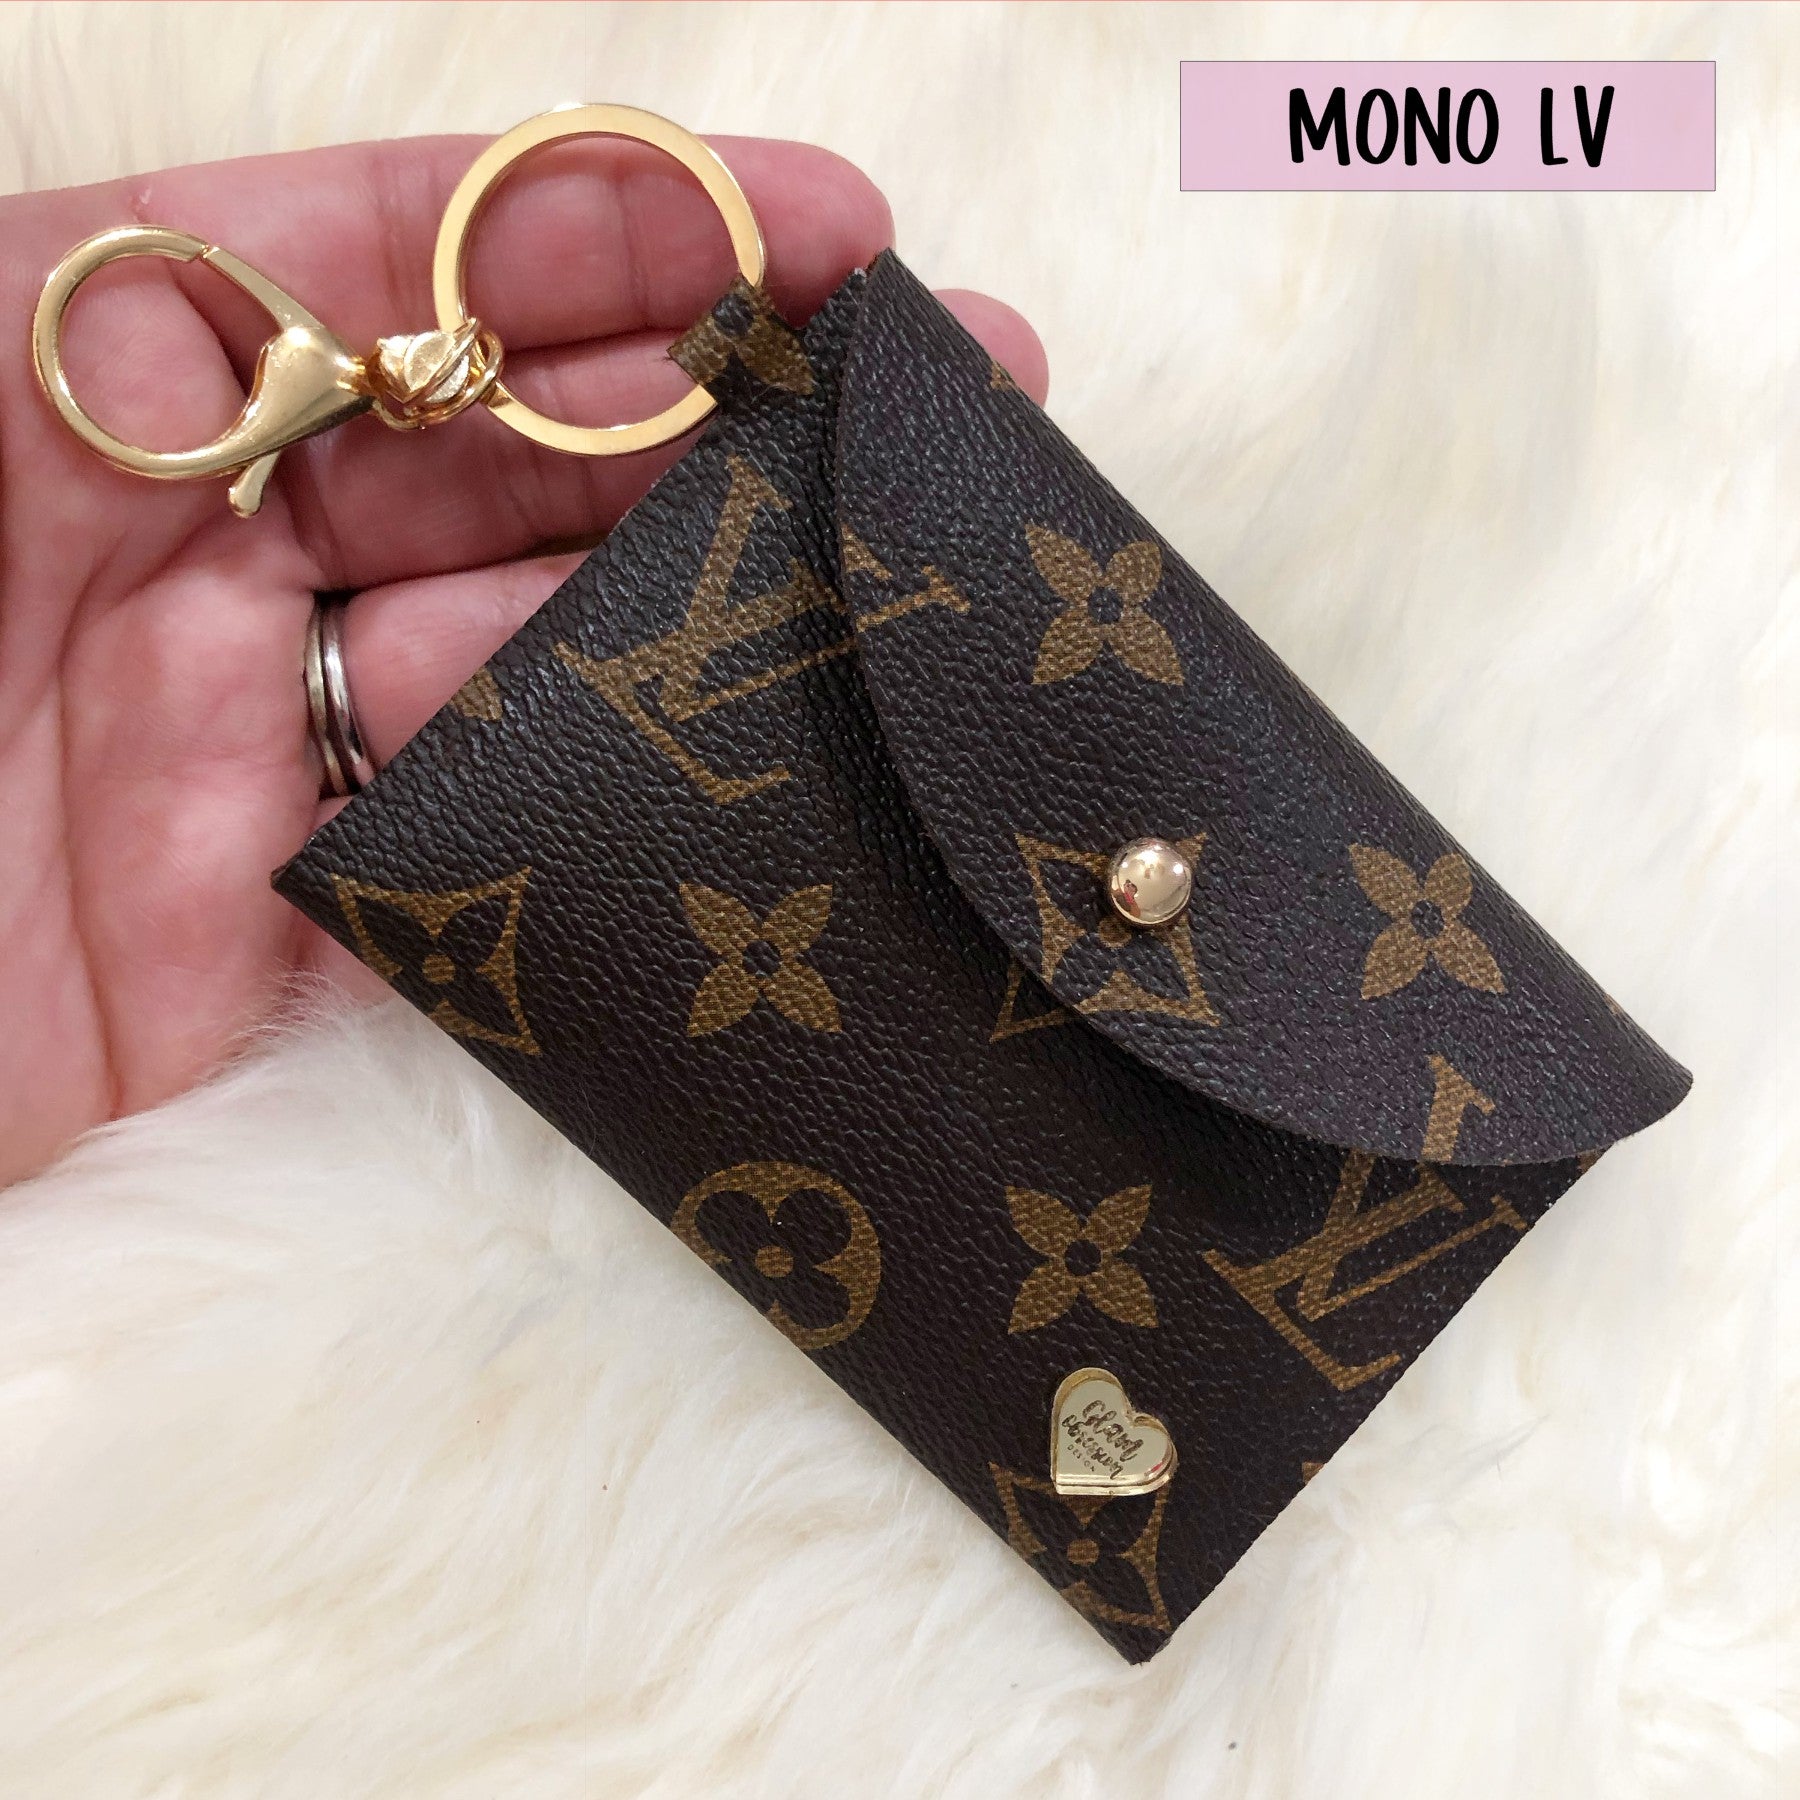 Louis Vuitton Kirigami Pouch Bag Charm And Key Holder (M69003)